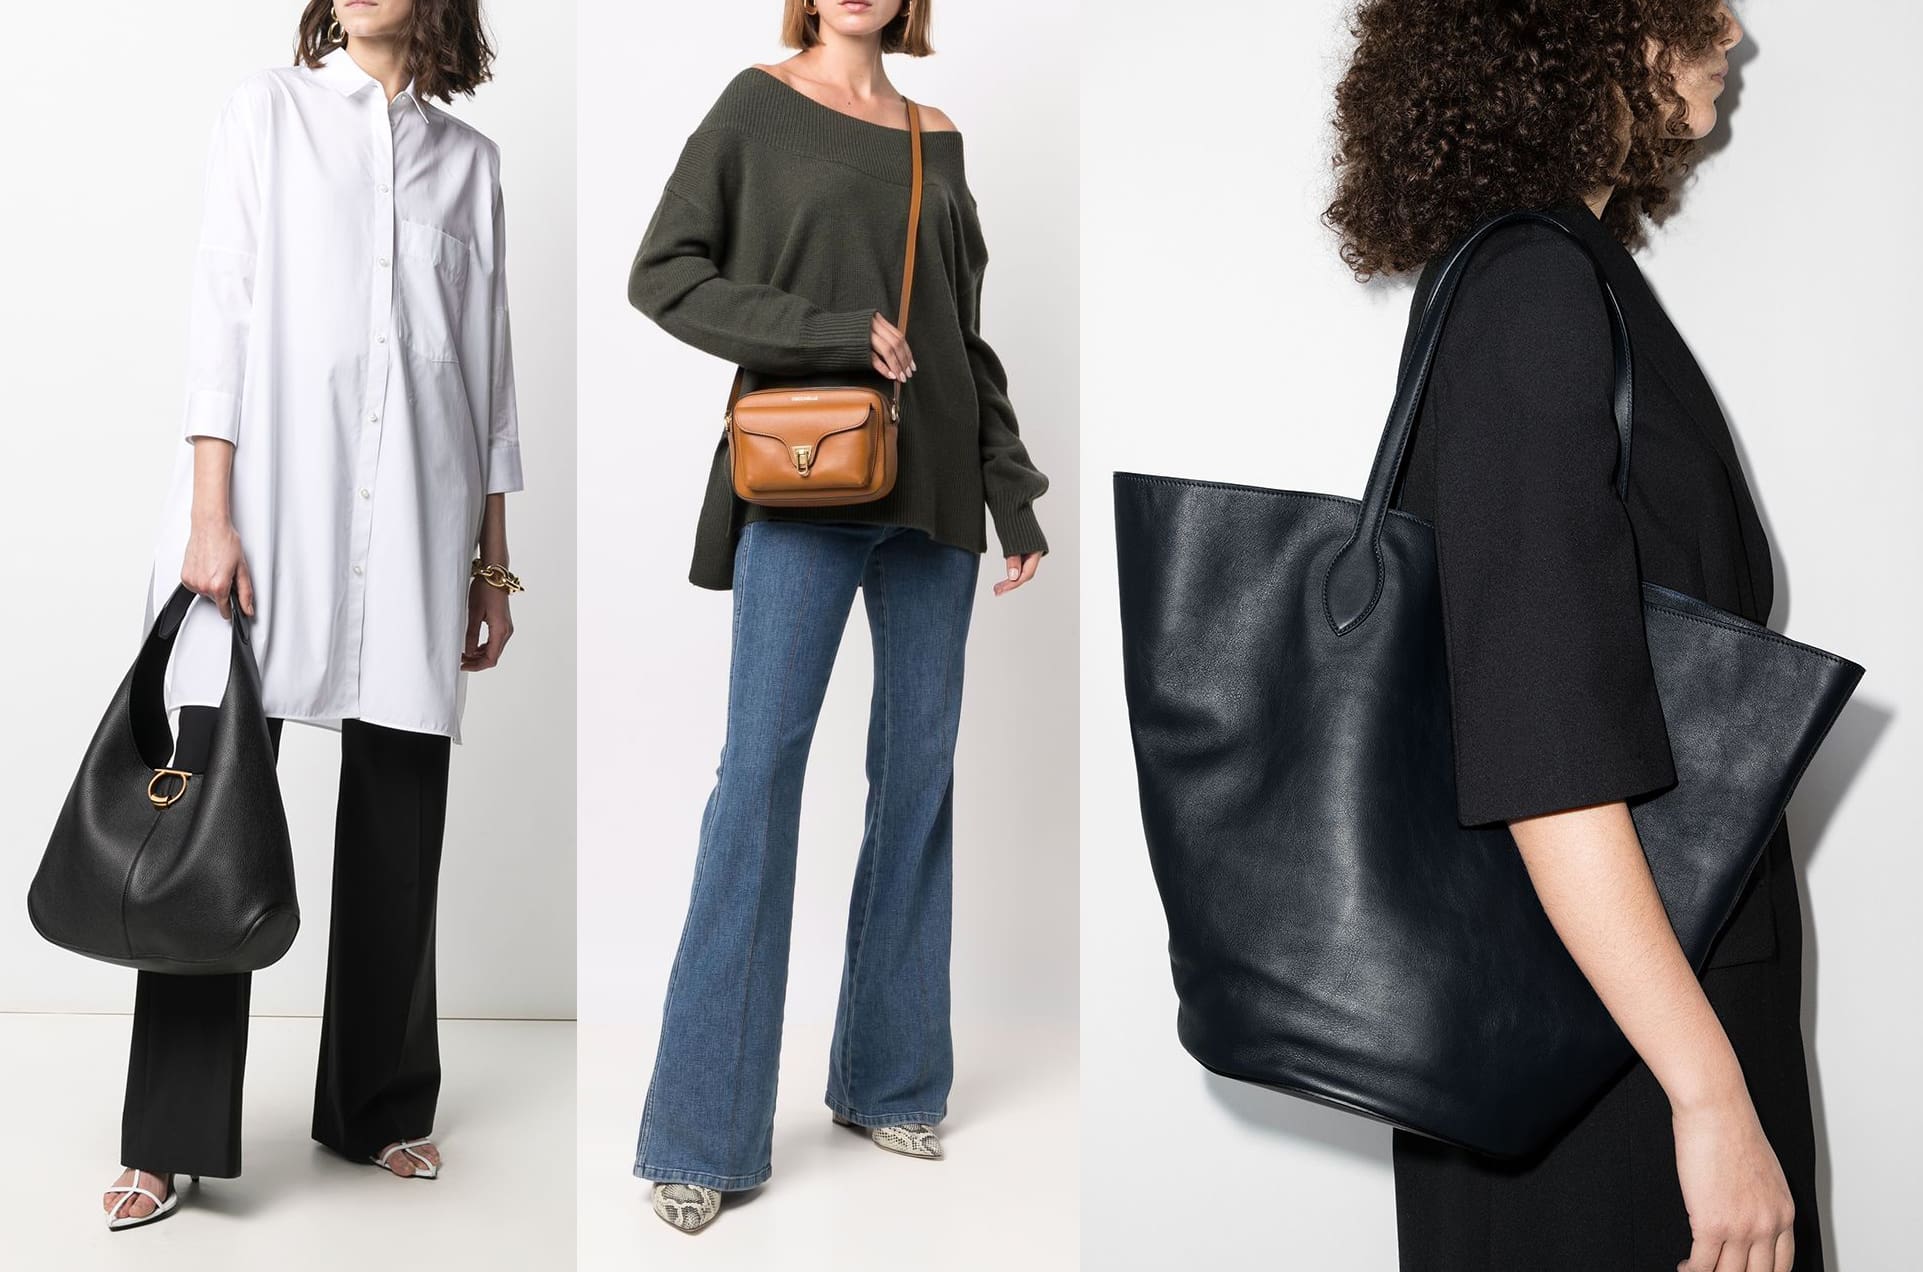 Hobo bags have a slouchy silhouette and are usually worn using a thick shoulder strap; satchels are often carried in multiple ways, either by the top handle or crossbody strap; totes have a structured silhouette and usually come with double handles